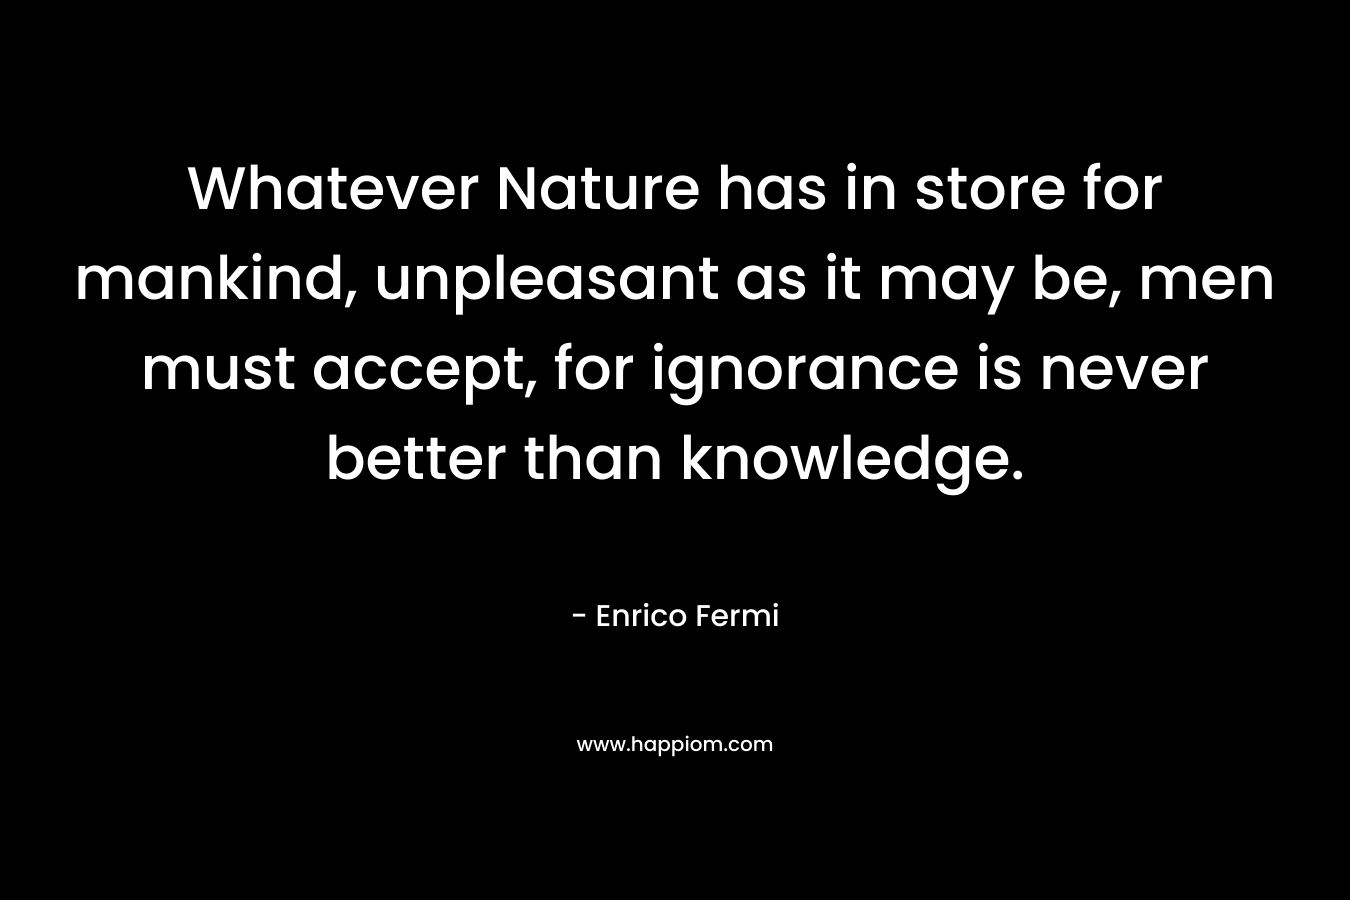 Whatever Nature has in store for mankind, unpleasant as it may be, men must accept, for ignorance is never better than knowledge.